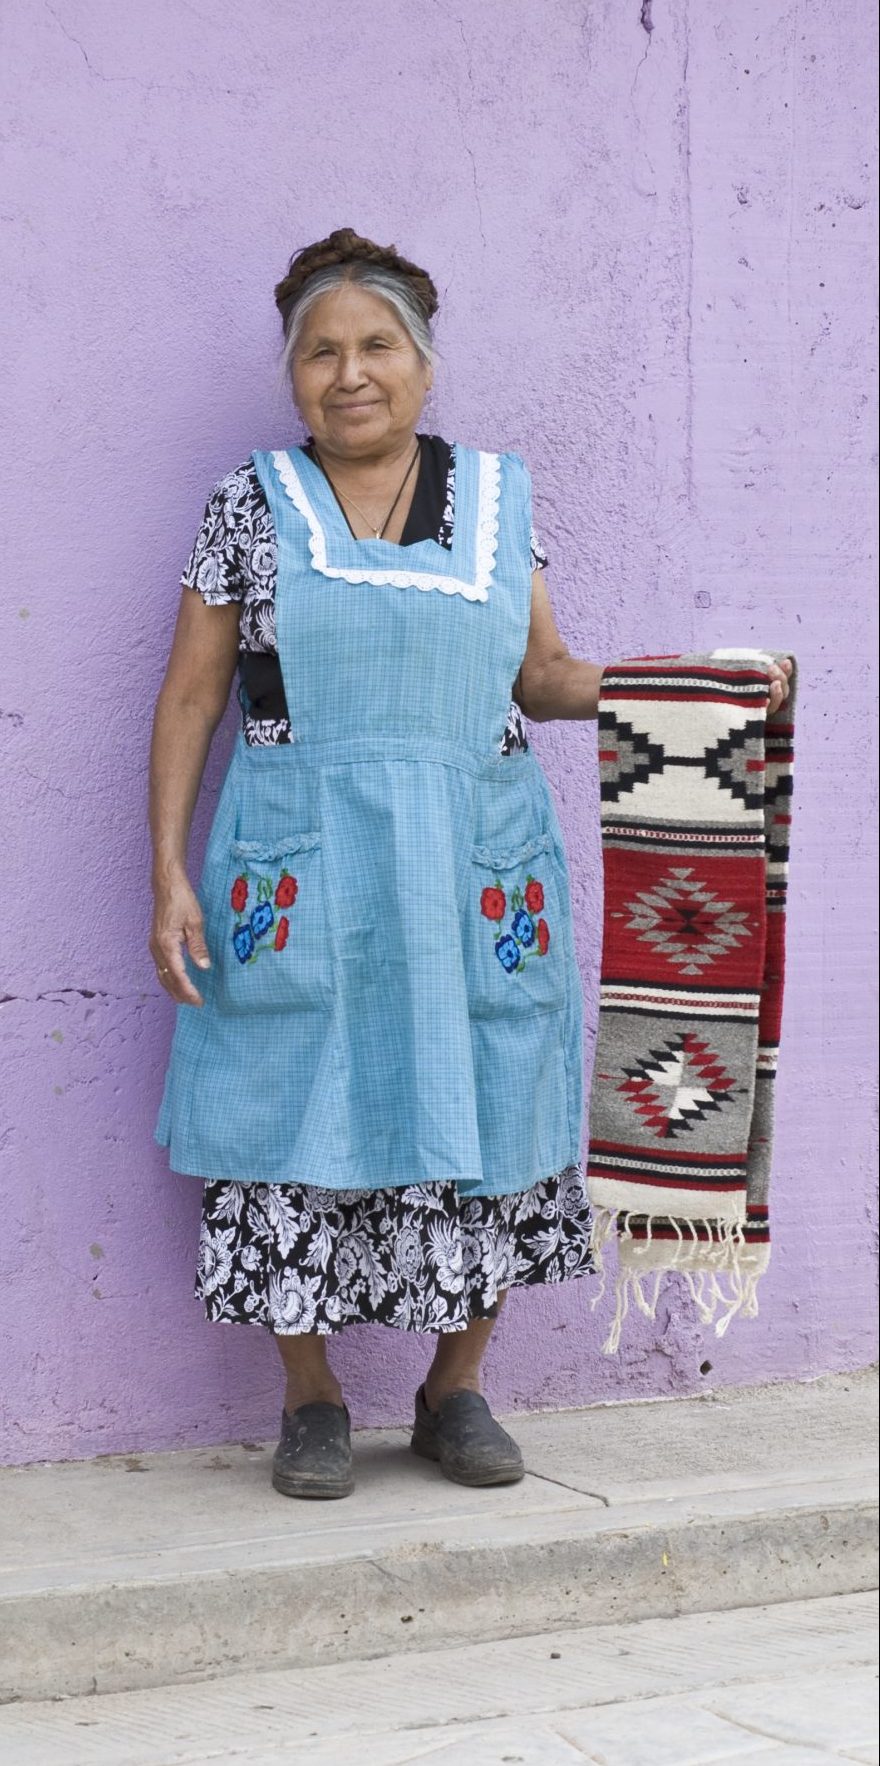 Friendly, smiling local indigenous Mexican woman vendor displaying handwoven Zapotec rug outside shop, Santa Ana del Valle, Oaxaca, Mexico